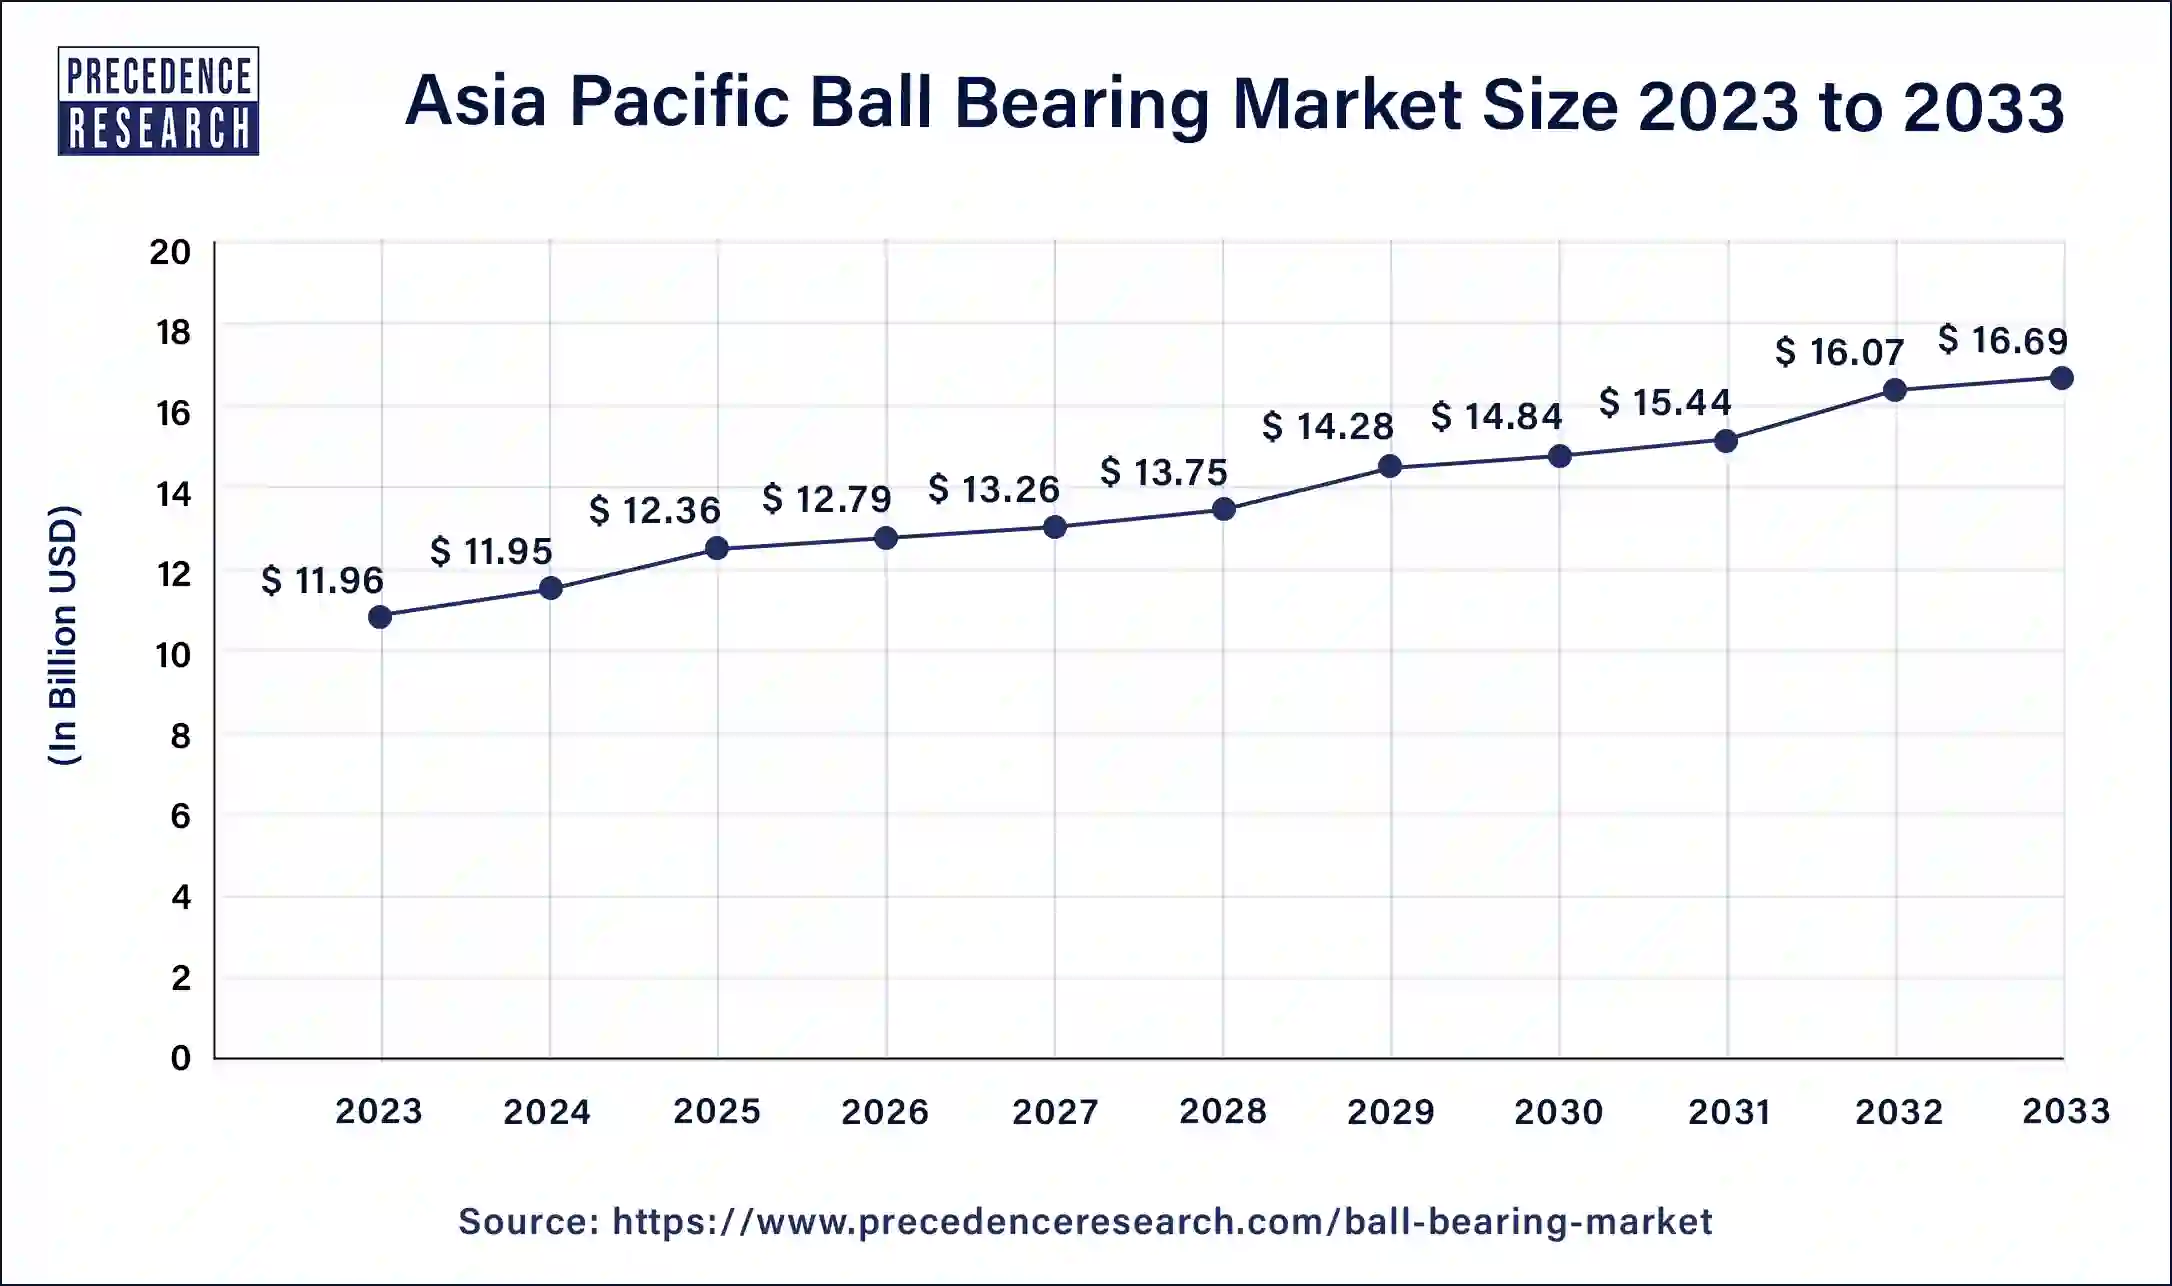 Asia Pacific Ball Bearing Market Size 2024 to 2033